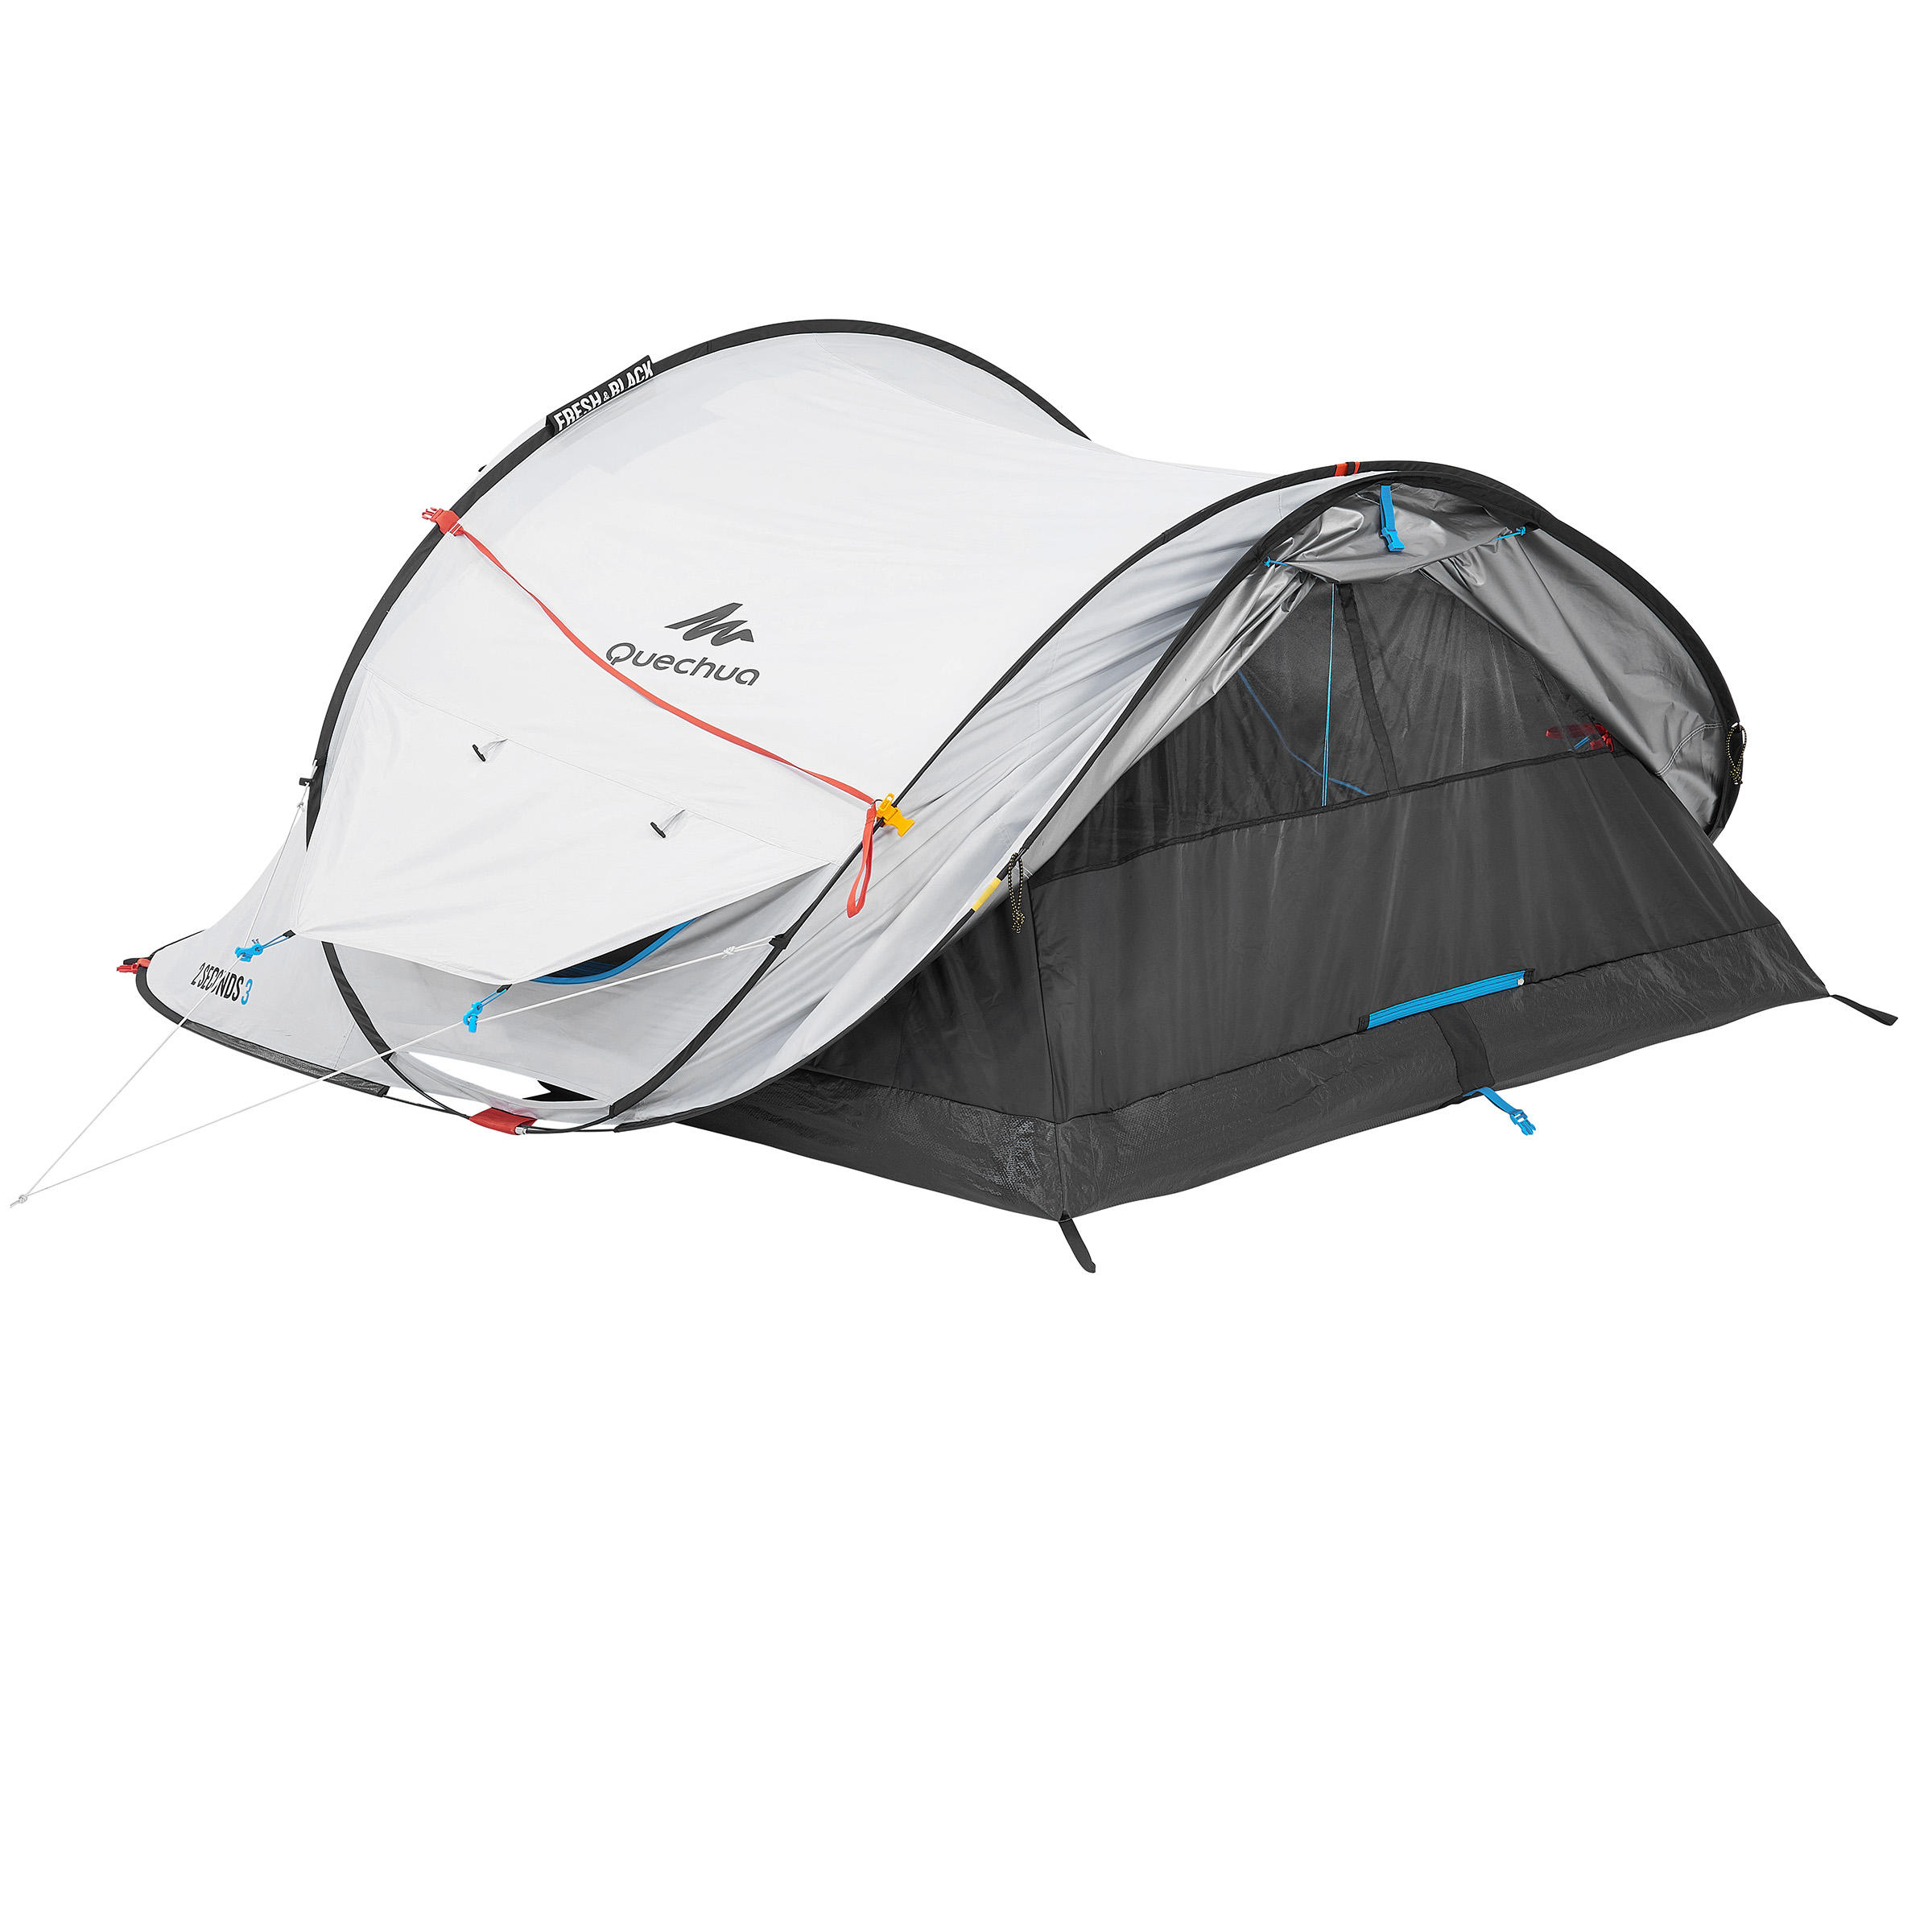 Fresh&Black 2 Second Camping/Hiking Tent 3 Person - Quechua